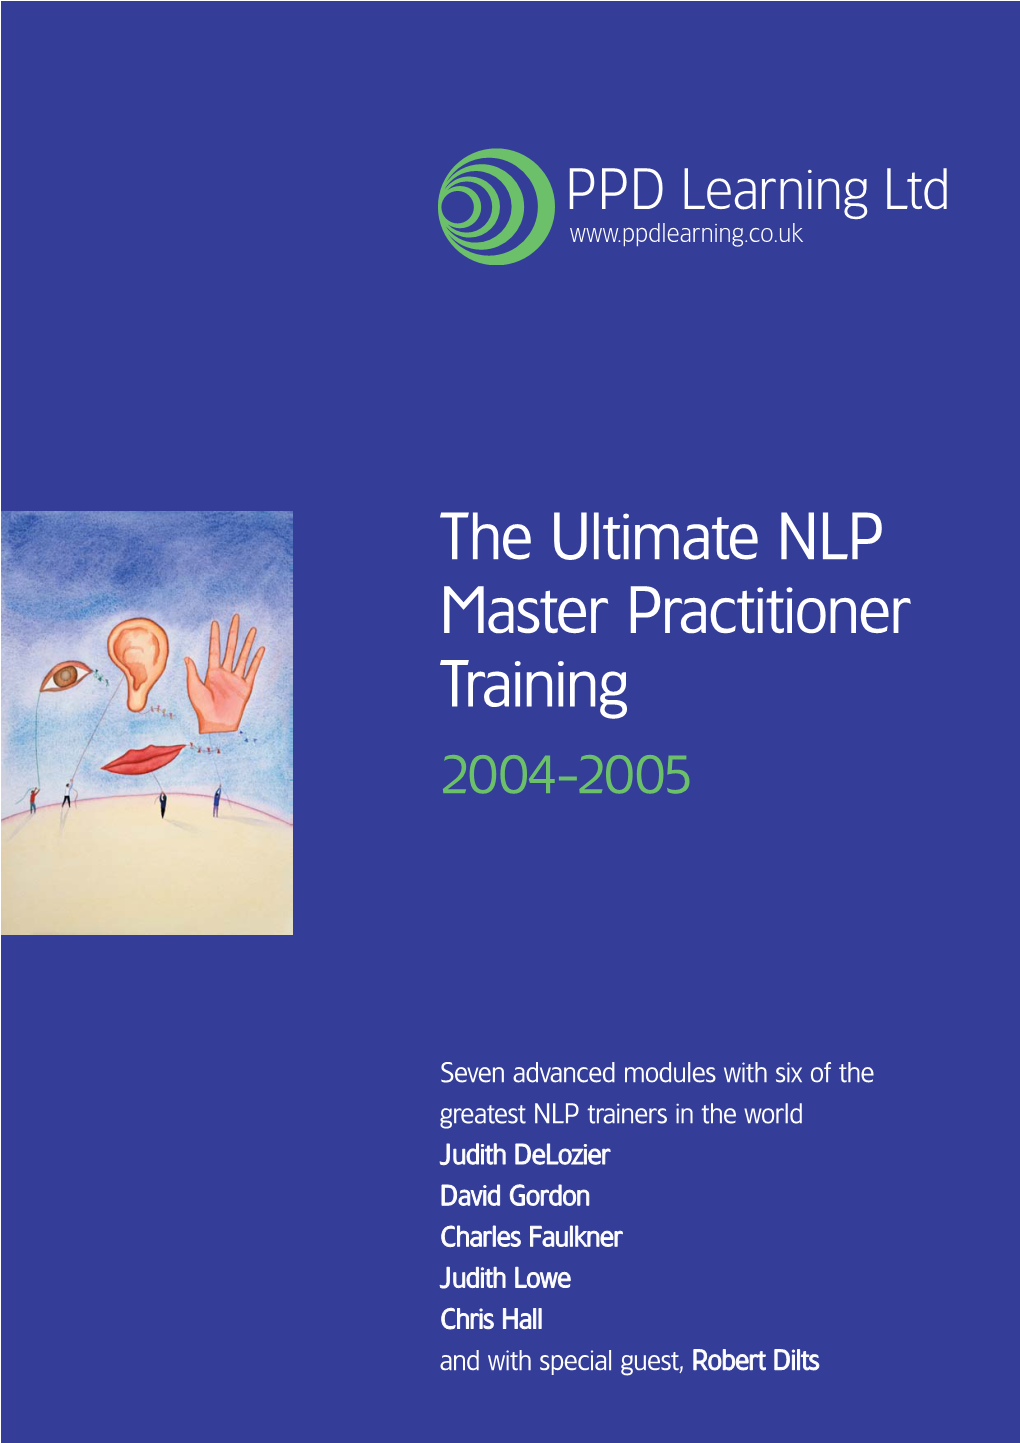 The Ultimate NLP Master Practitioner Training 2004-2005